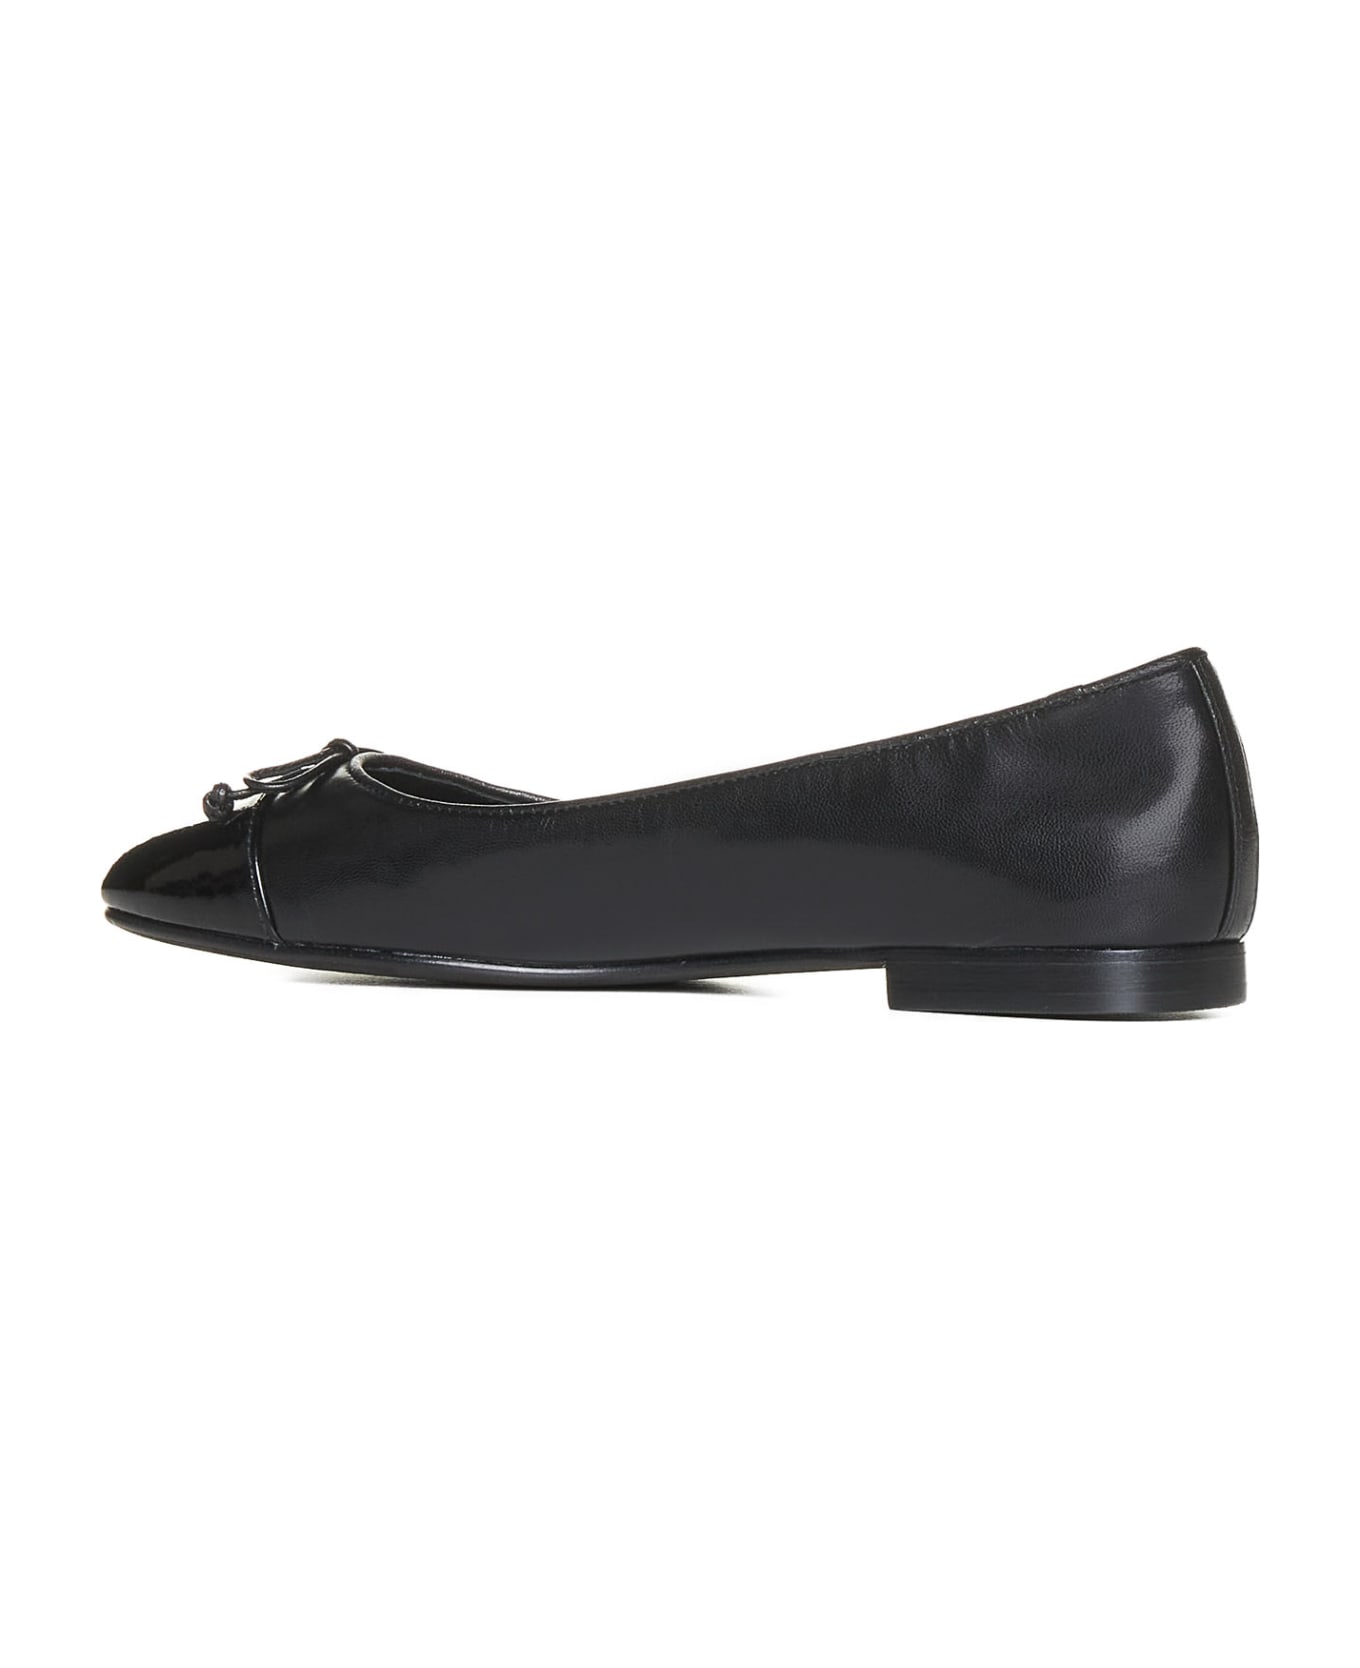 Tory Burch Bow Ballets - Perfect Black/perfect Black